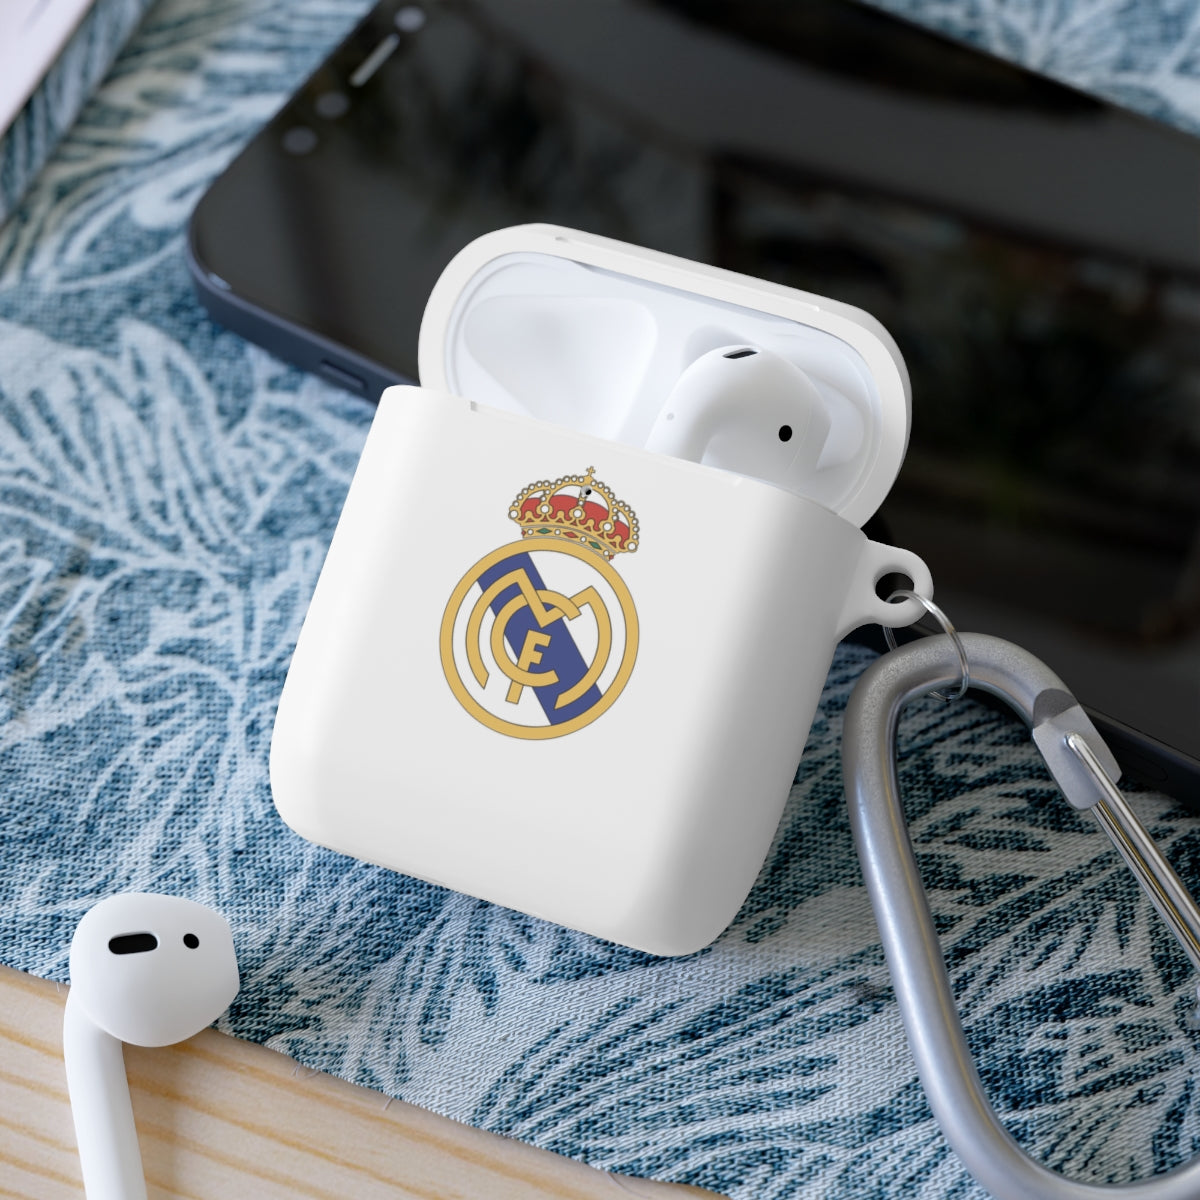 Real Madrid AirPods and AirPods Pro Case Cover